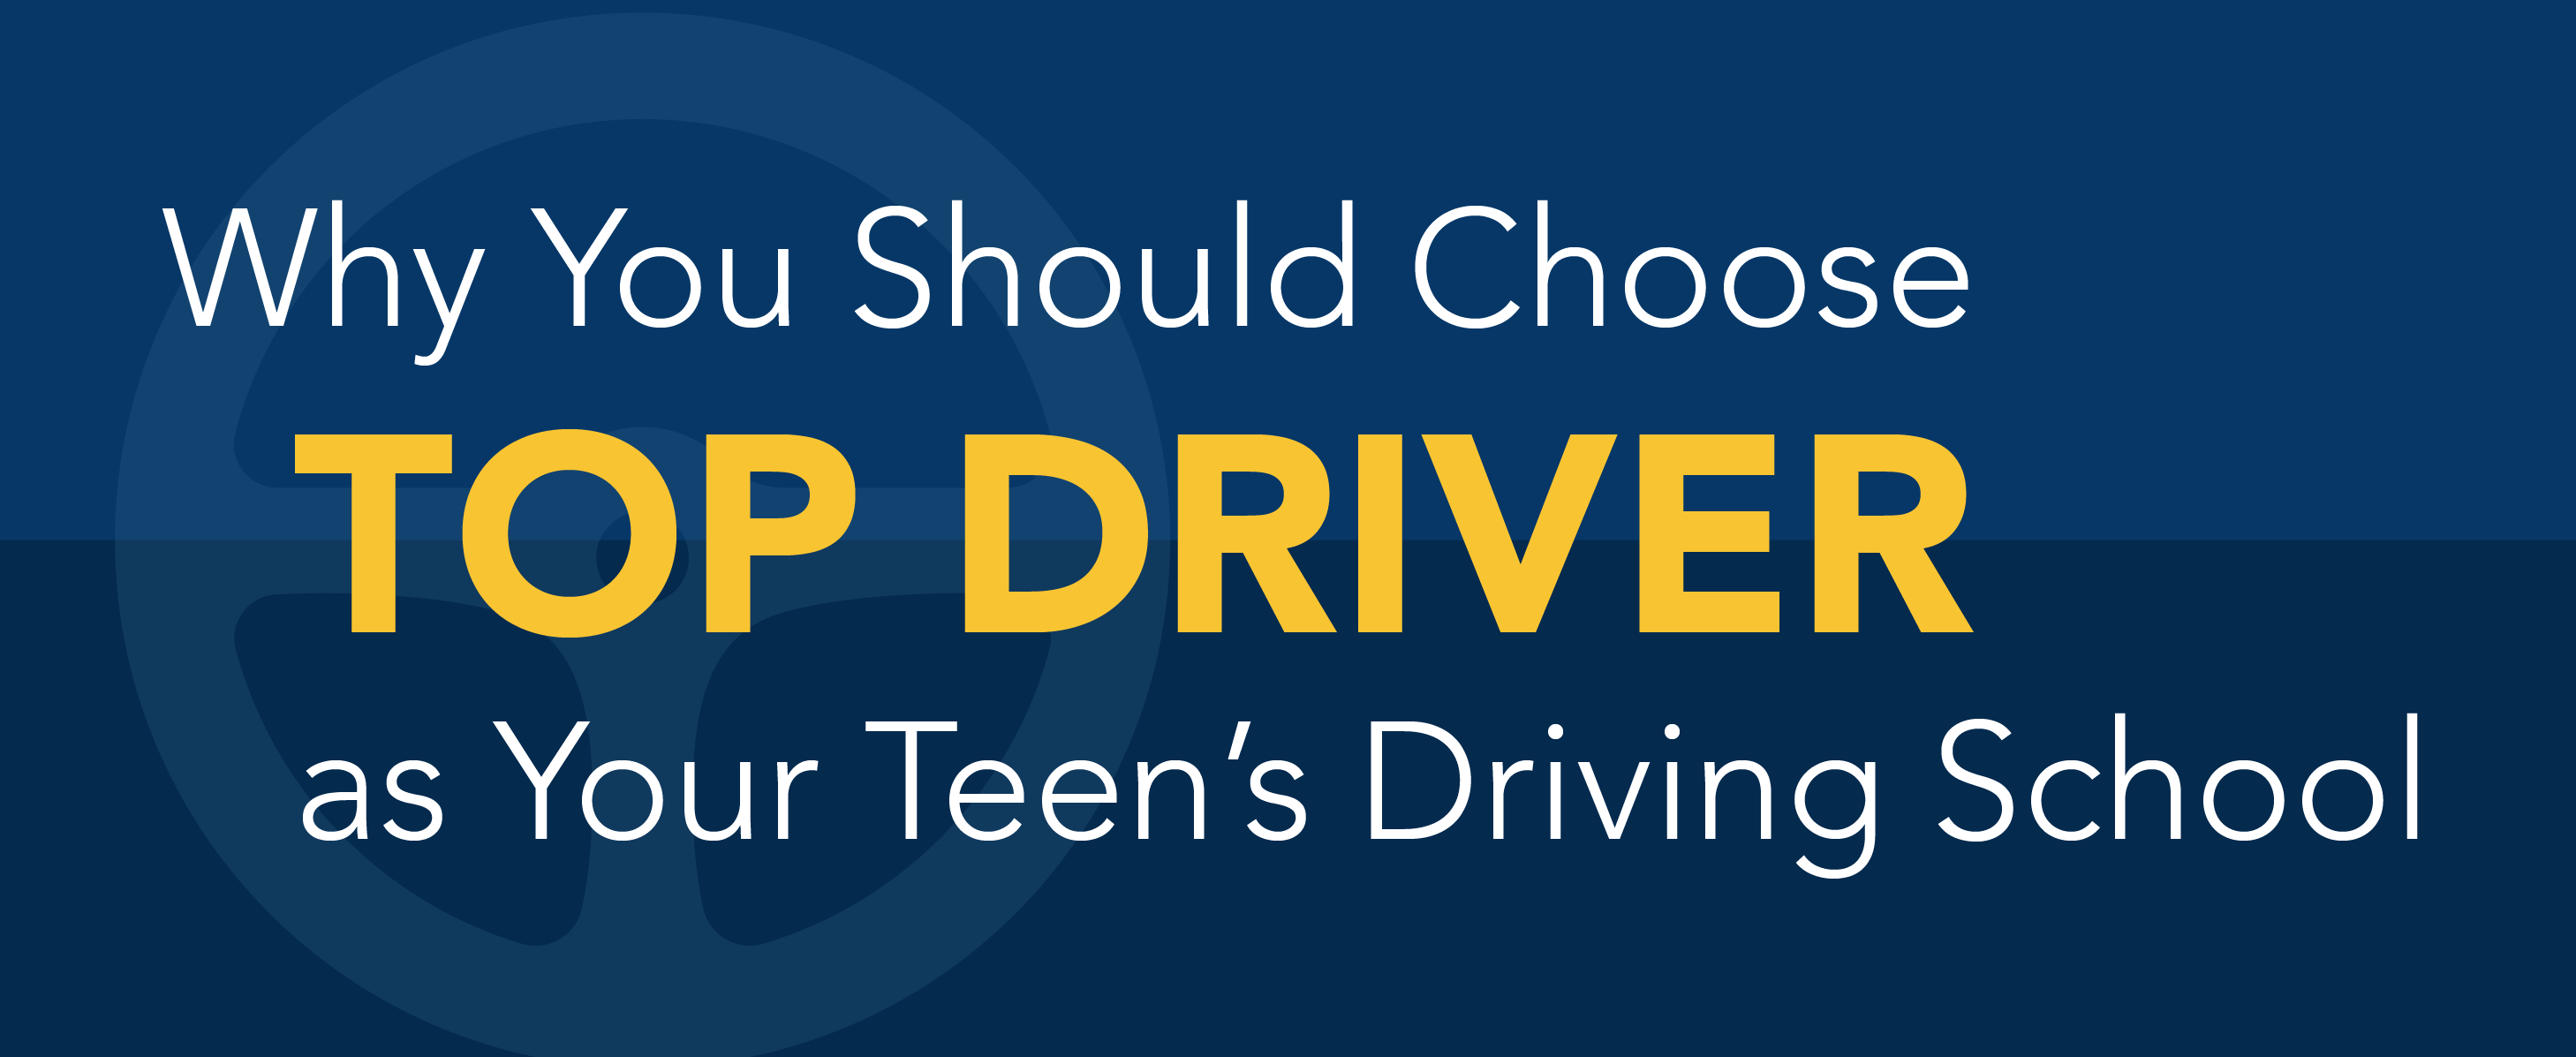 Why you should choose top driver as your teen's driving school